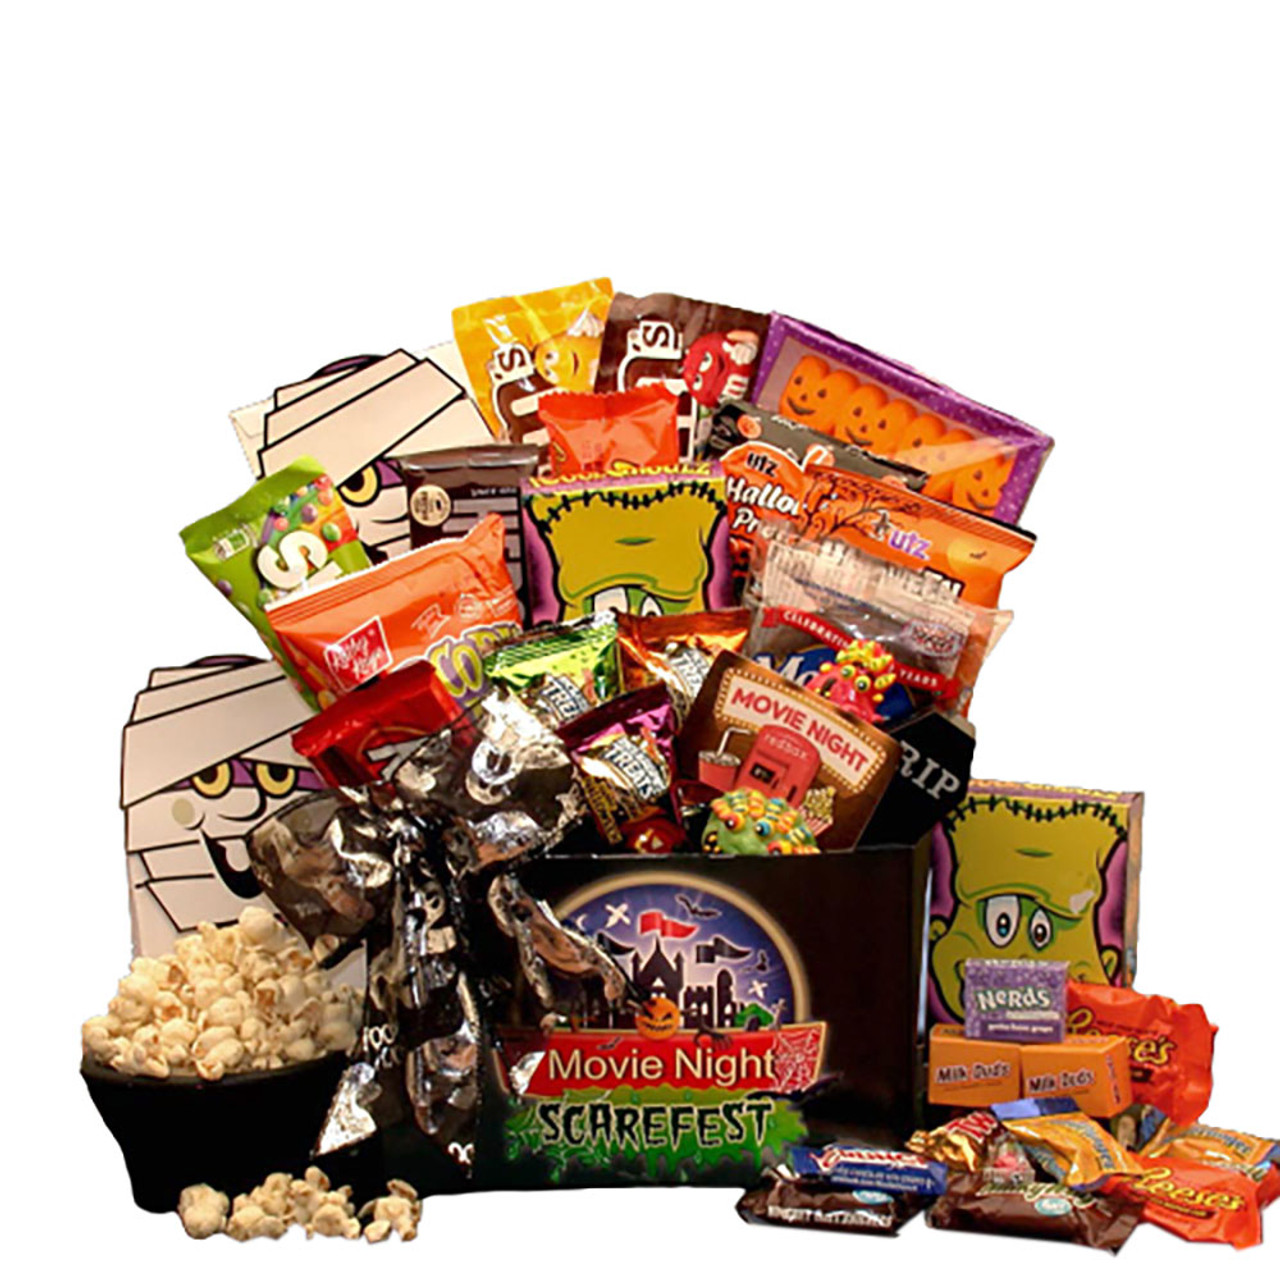 Halloween Spook-fest Movie Gift Box with $5 Redbox Card product image